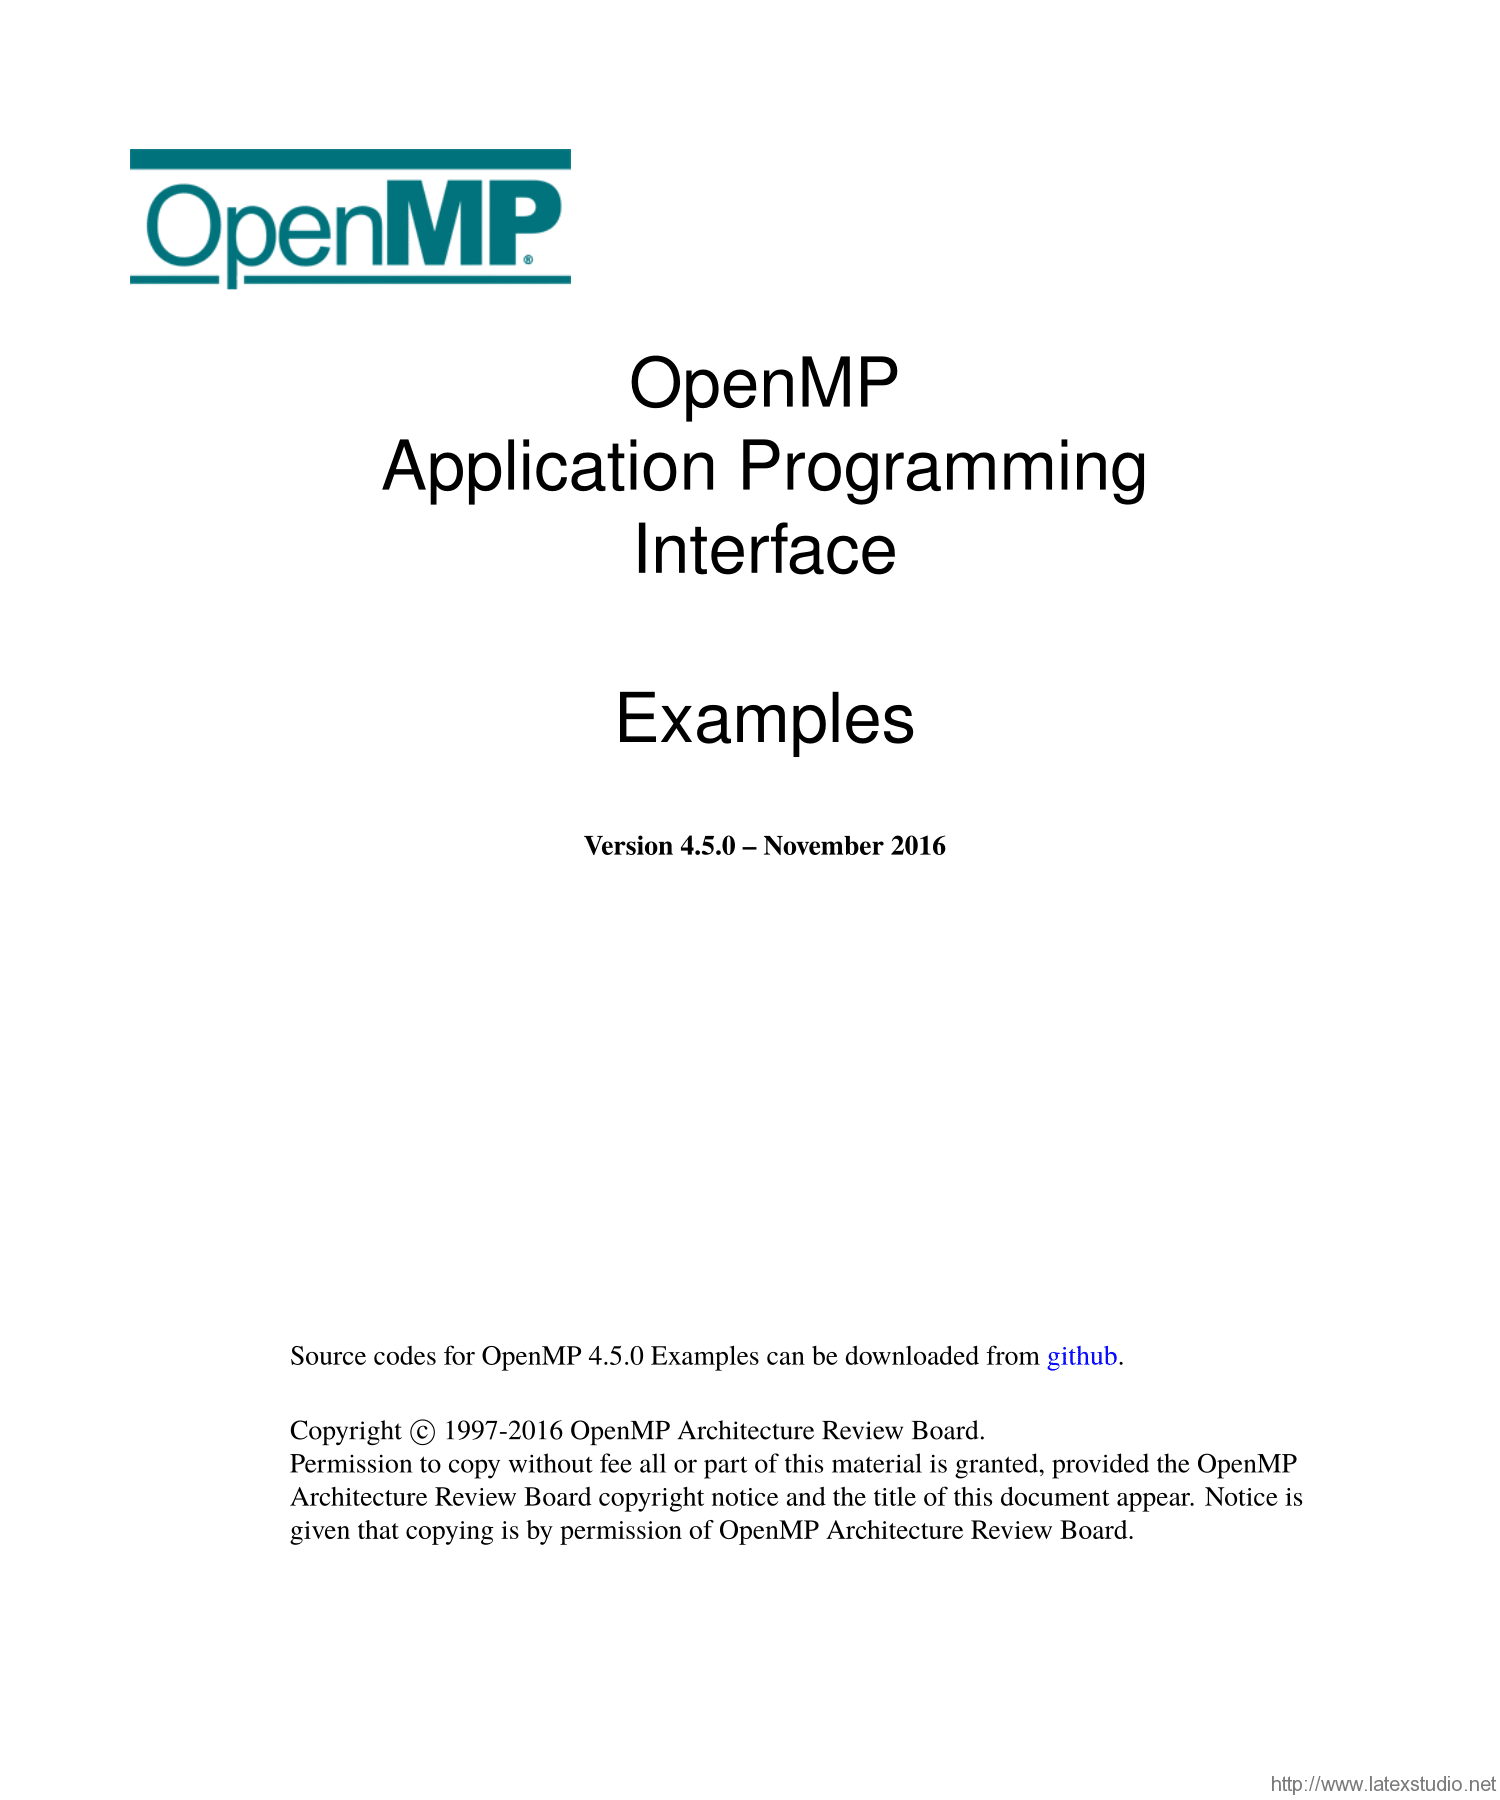 openmp-examples-01